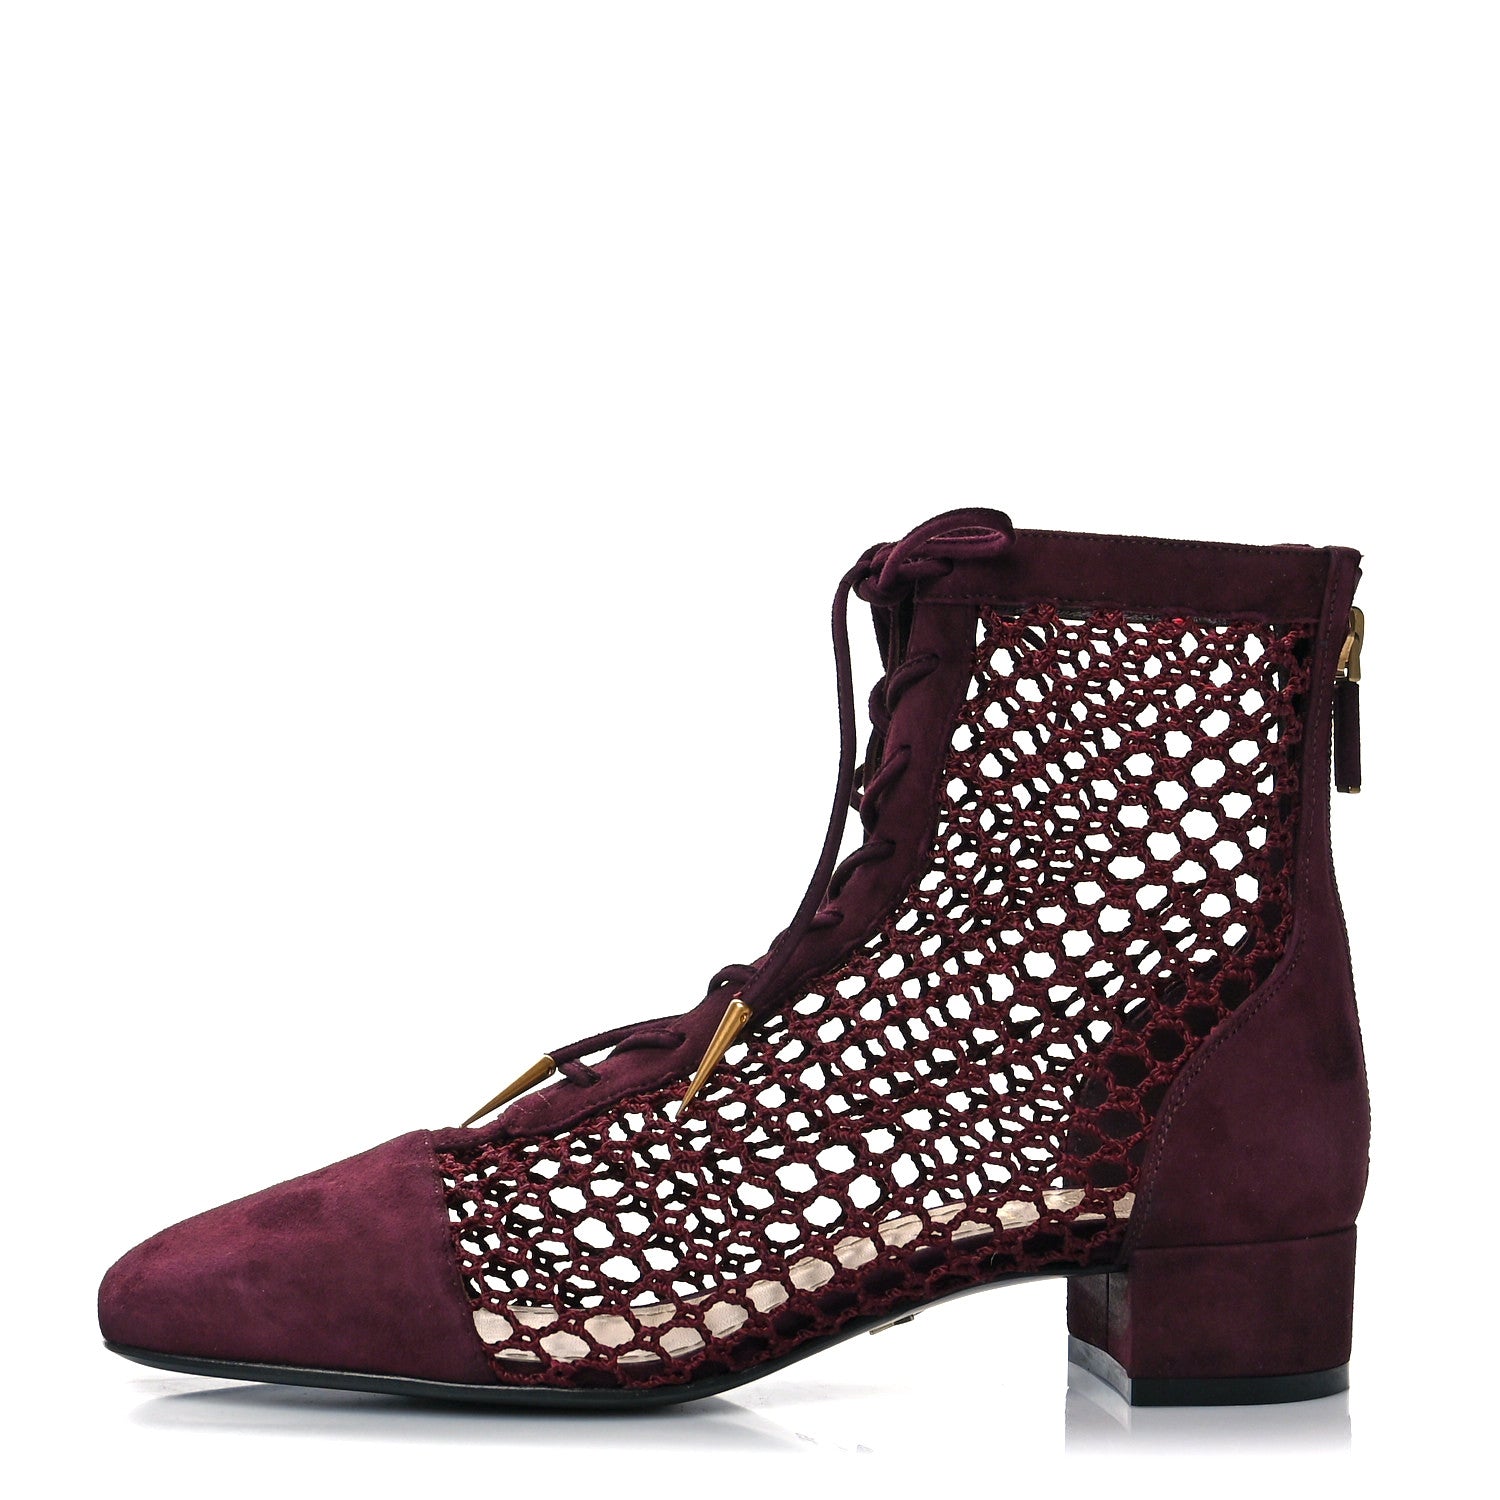 Naughtily-d lace up boots Dior Burgundy size 38 EU in Suede - 26401541